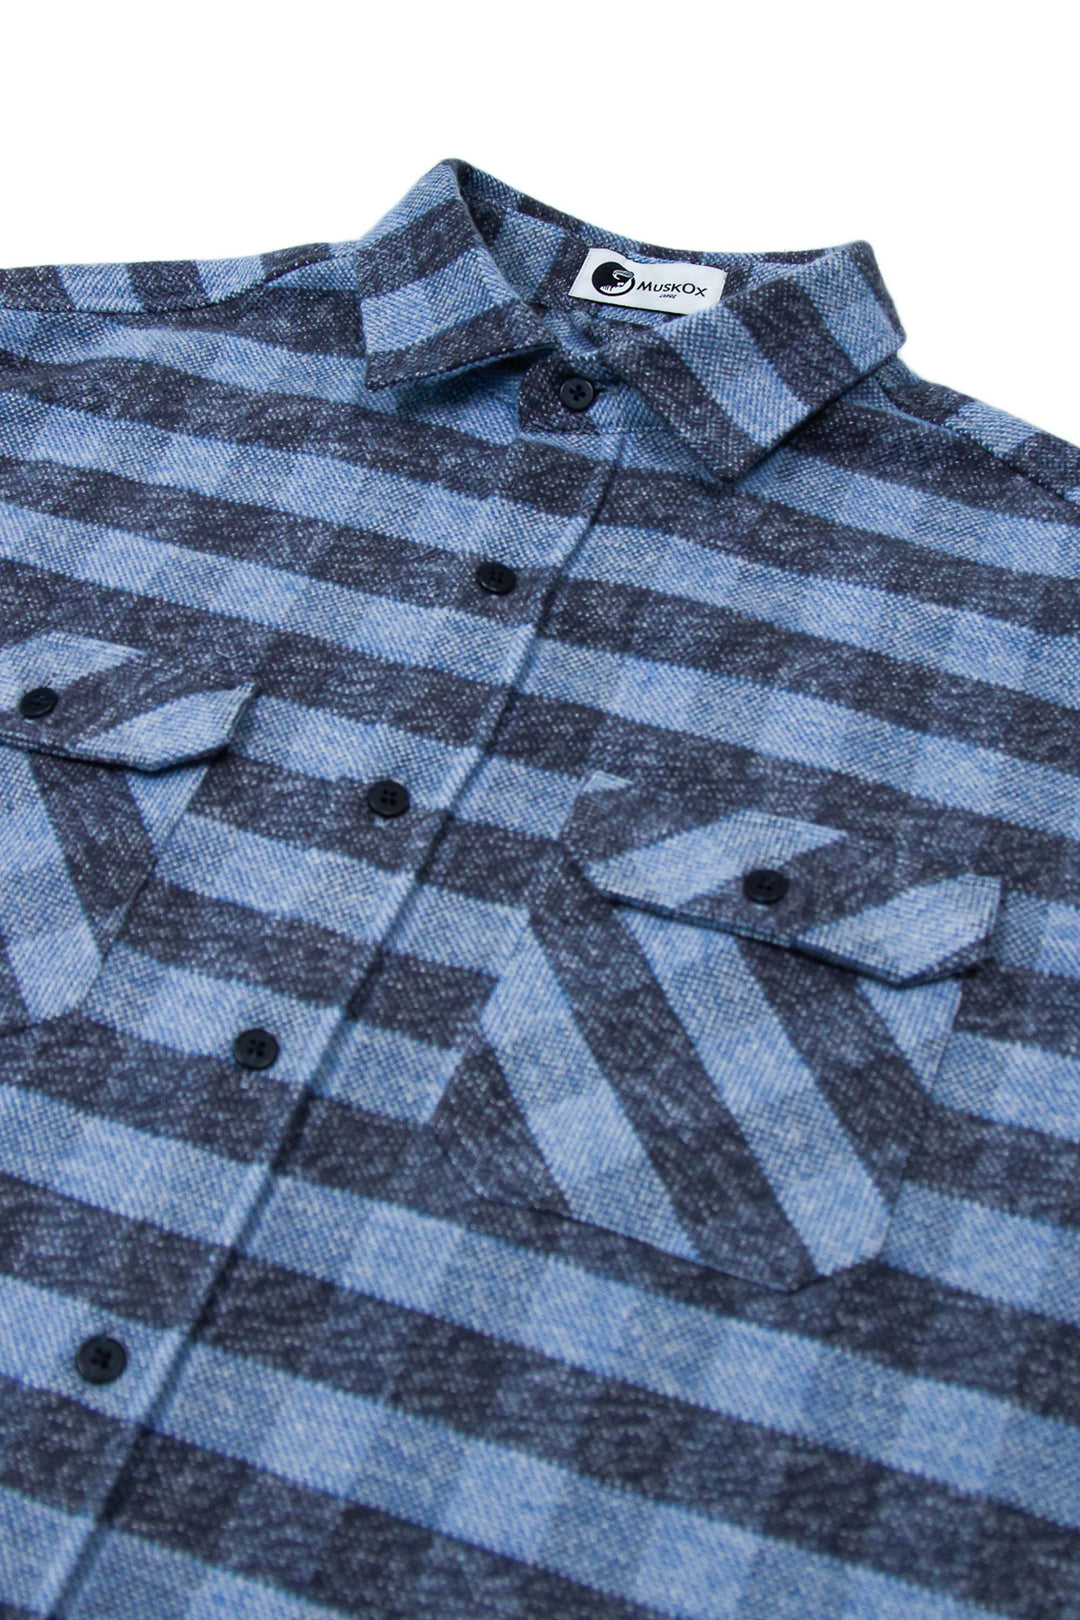 The Grand Flannel in Cadet Blue By MuskOx. The Cadet Blue Grand Flannel is a Heavyweight Flannel by MuskOx Outdoor Apparel. 100% Cotton, Durable Flannel Shirt. Our flannels are made of a heavy duty cotton twill with a soft brushed finish so you can be prepared for any adventure without sacrificing comfort. Since we want you to be built for every occasion, we've included two secure chest pockets.